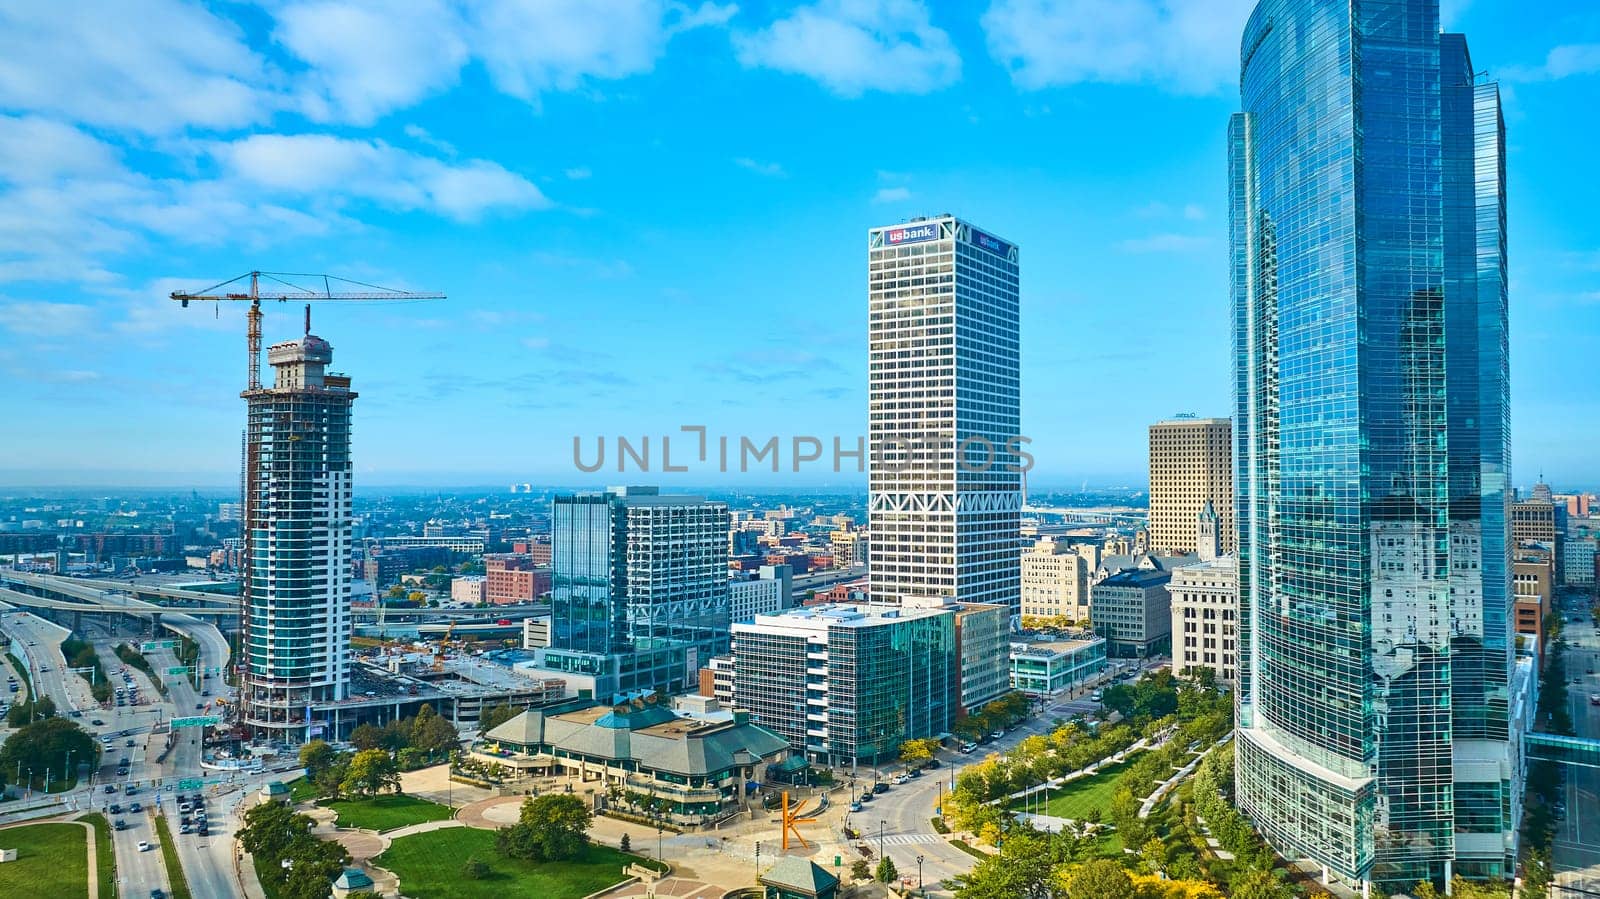 Aerial View of Urban Growth and Skyscrapers, Milwaukee by njproductions